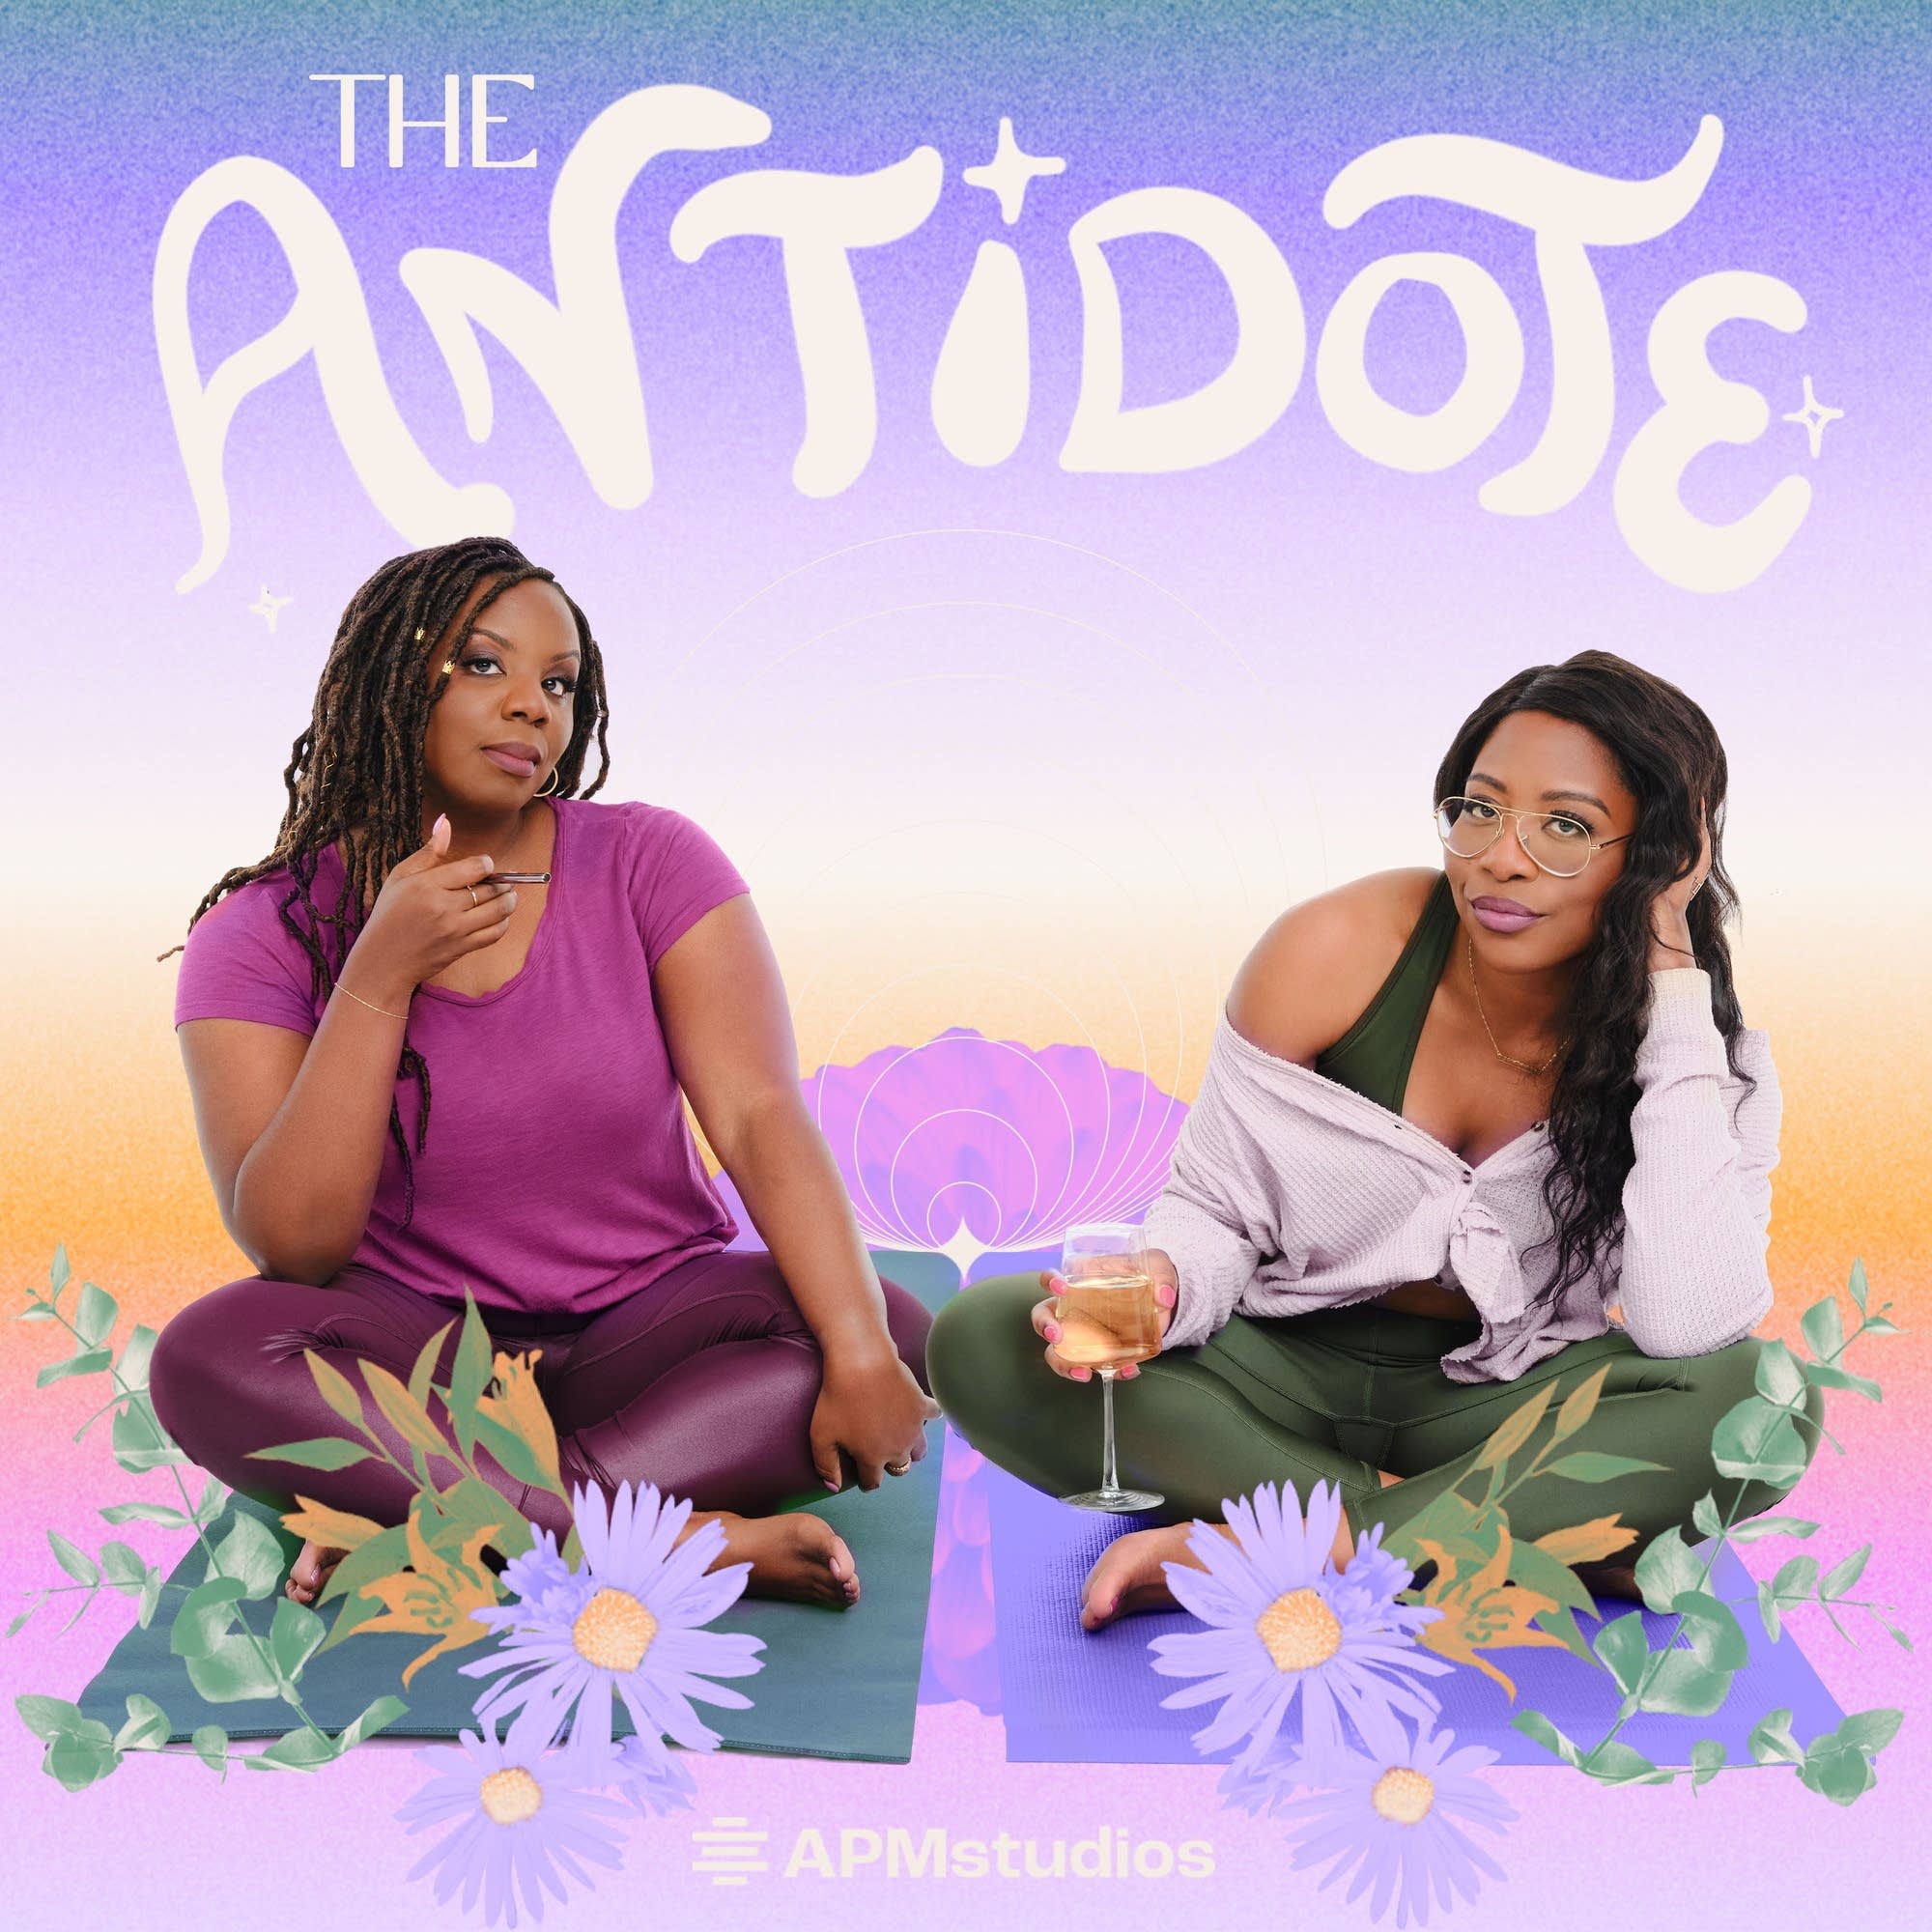 The Antidote podcast show image